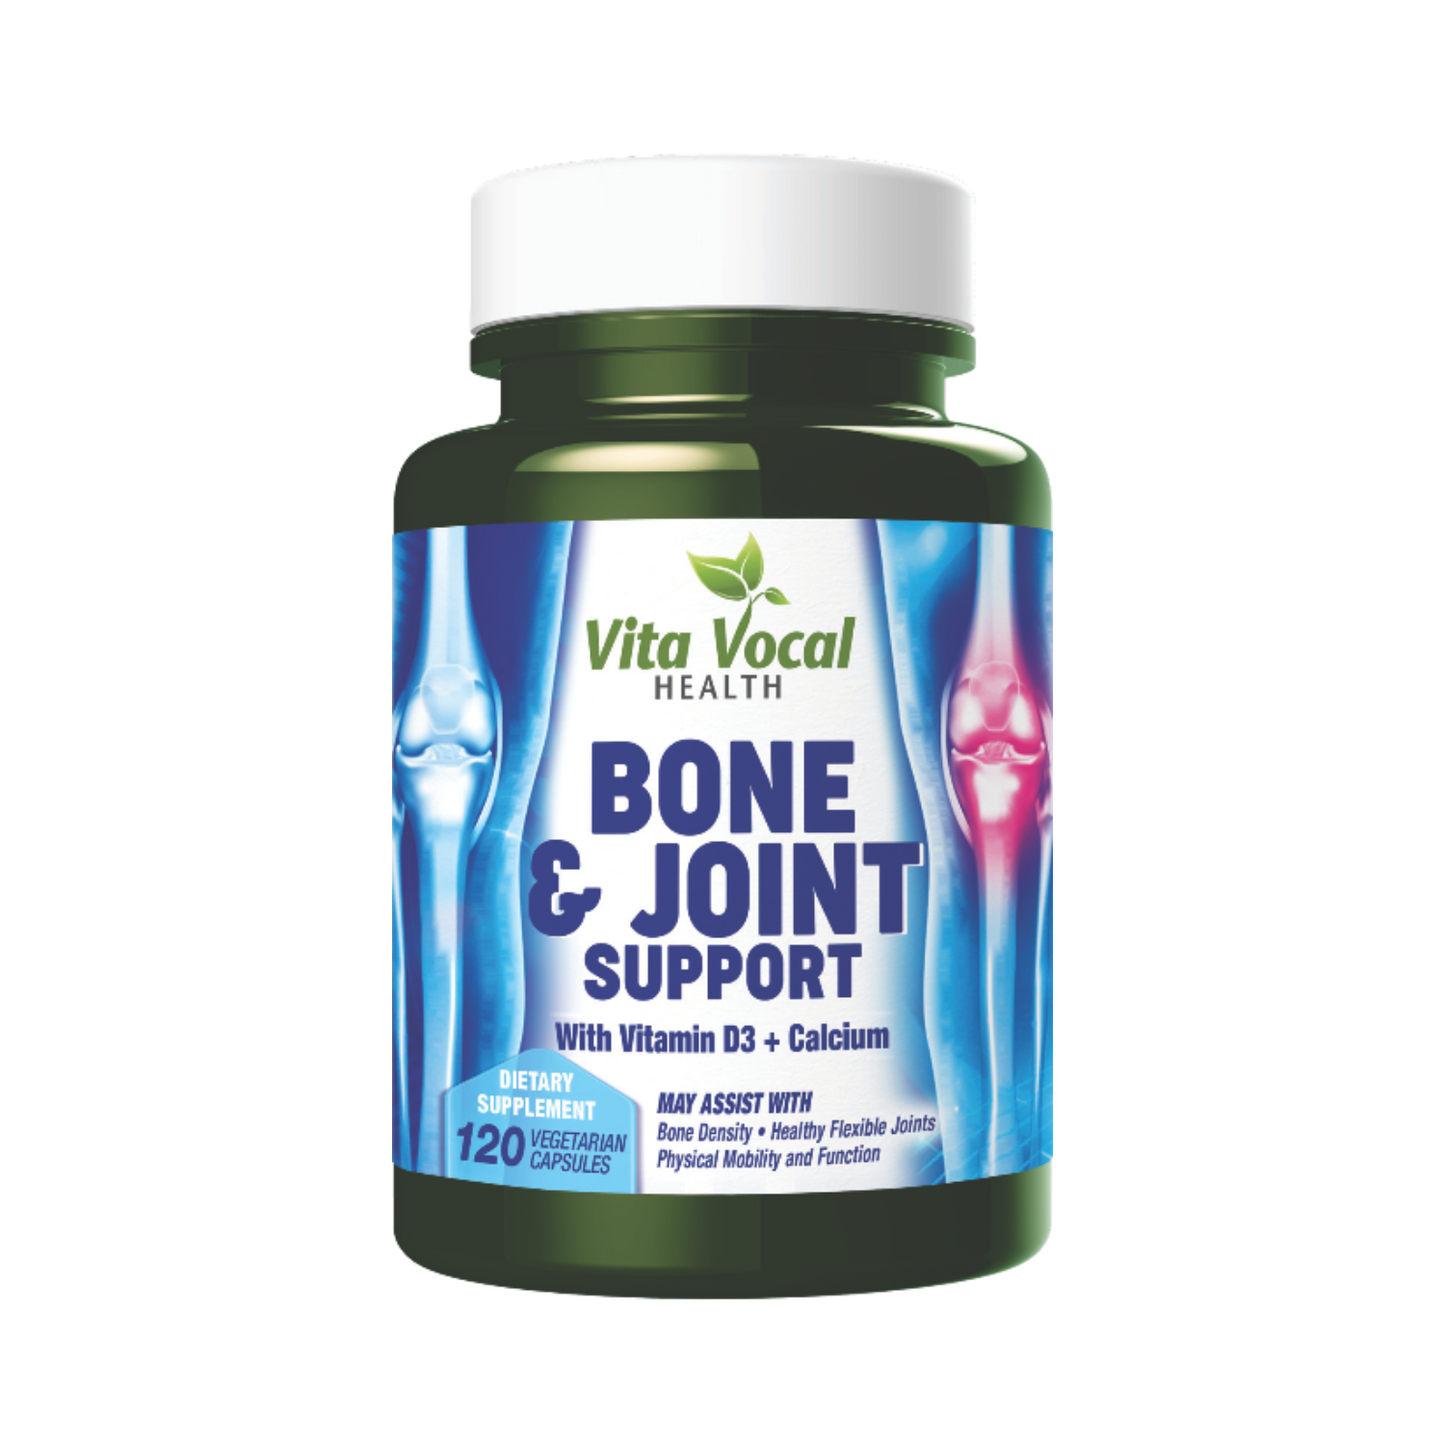 Bone & Joint Support | Vita Vocal Best Vitamins and Supplements